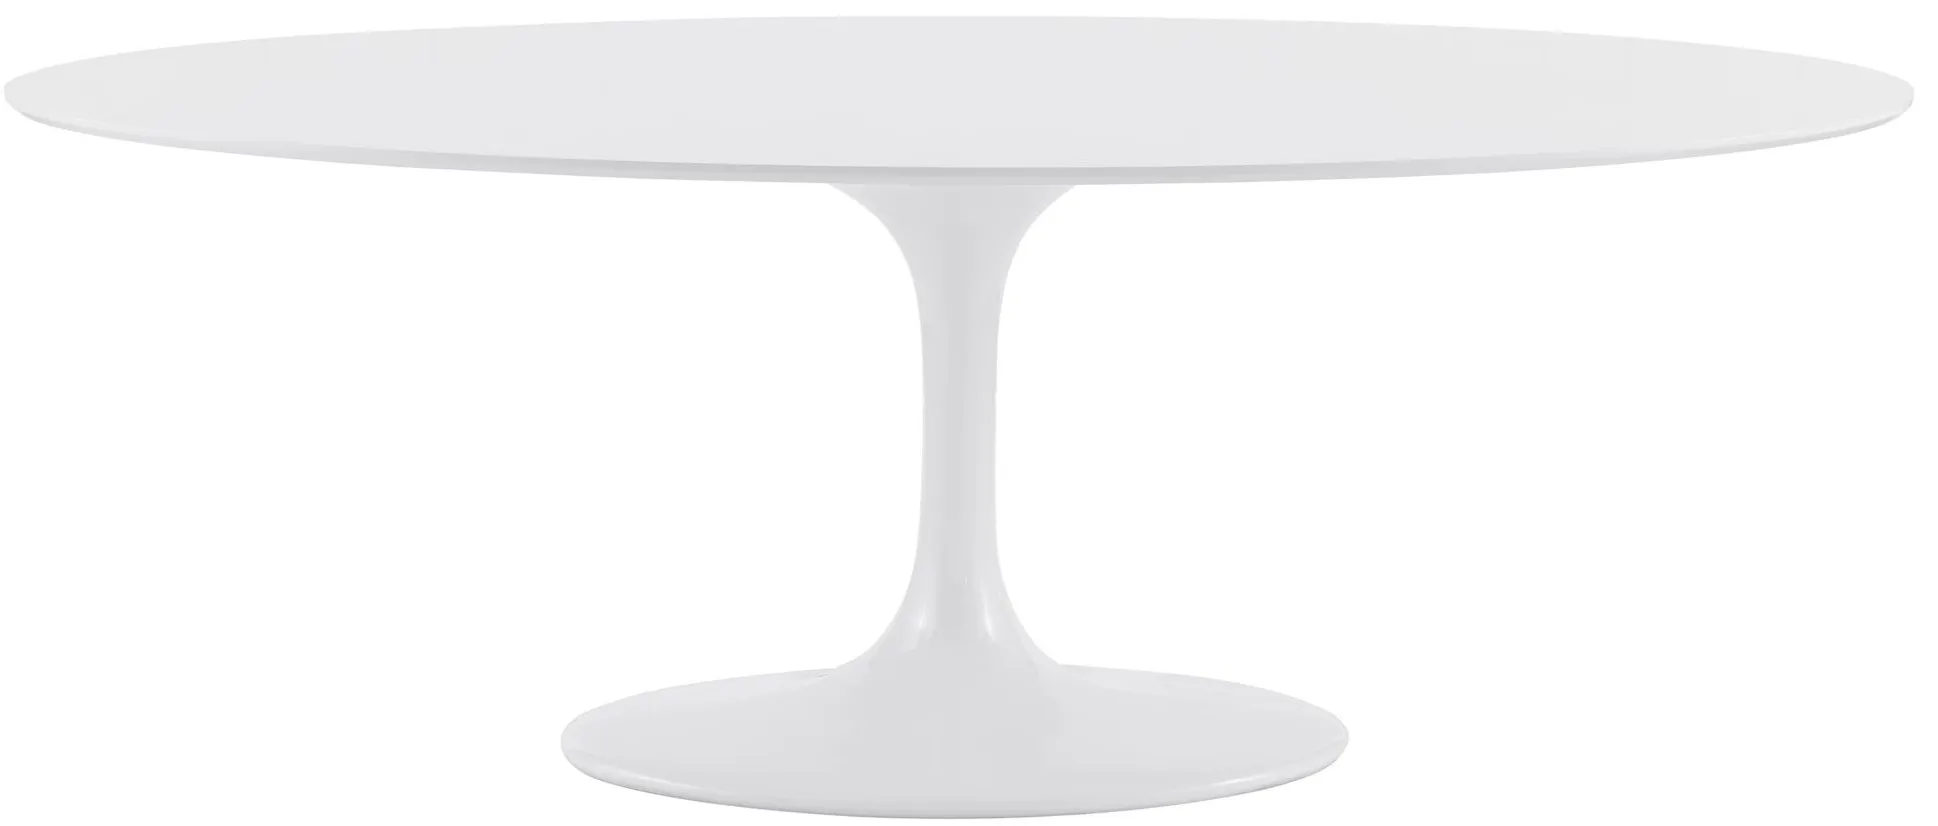 Astrid 79" Oval Table in White by EuroStyle